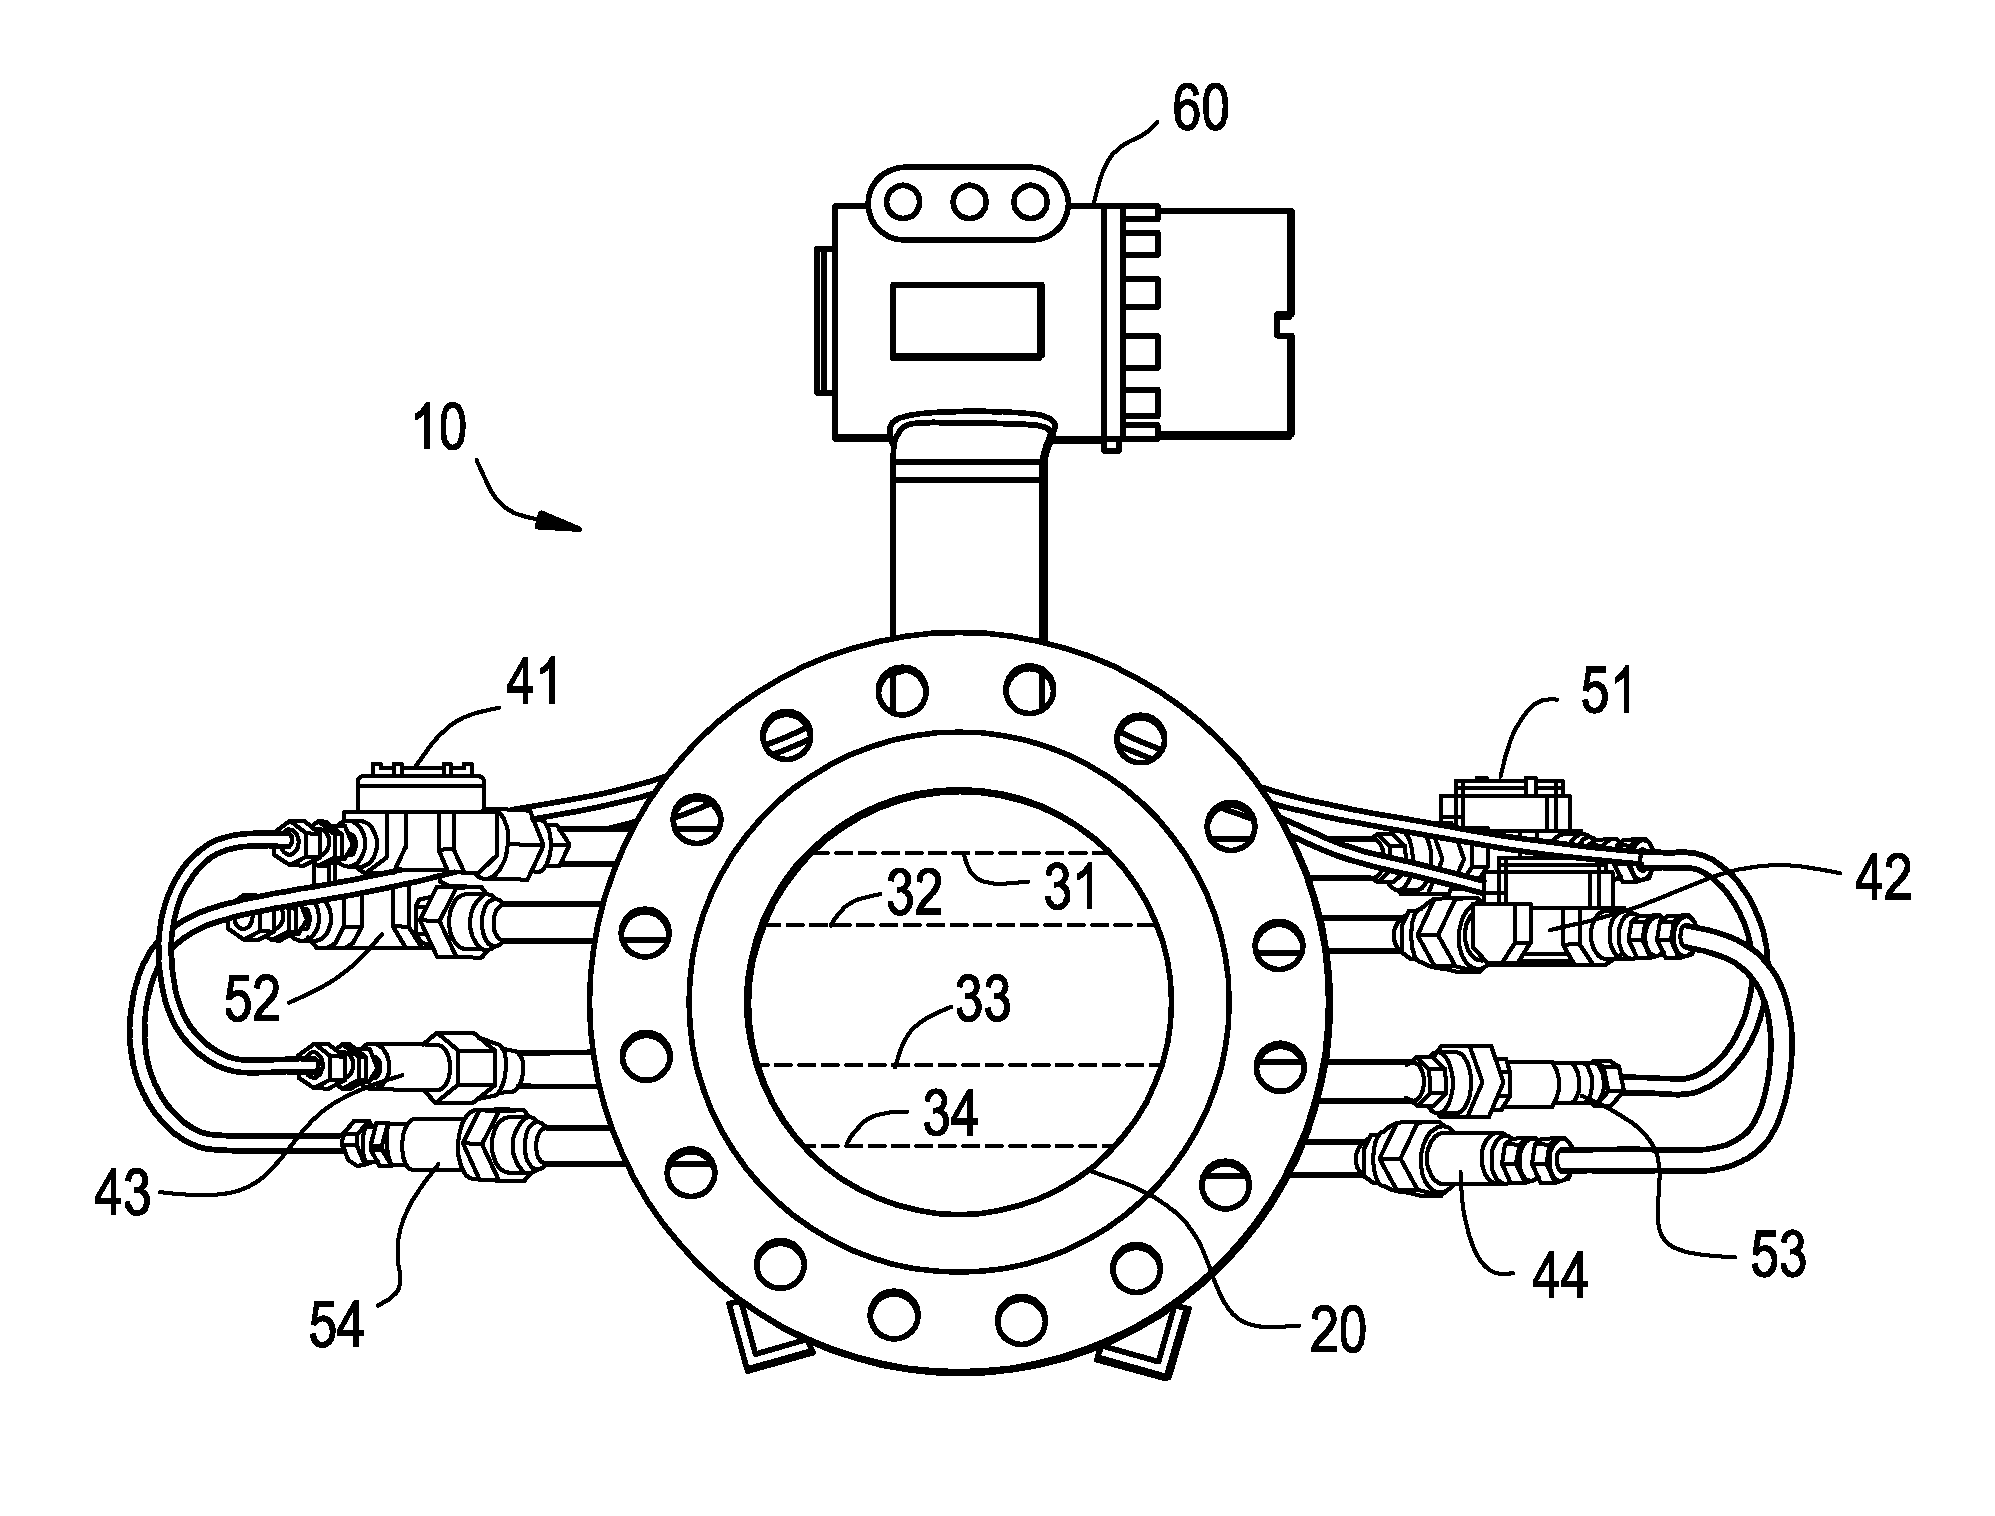 Method and system for multi-path ultrasonic flow rate measurement